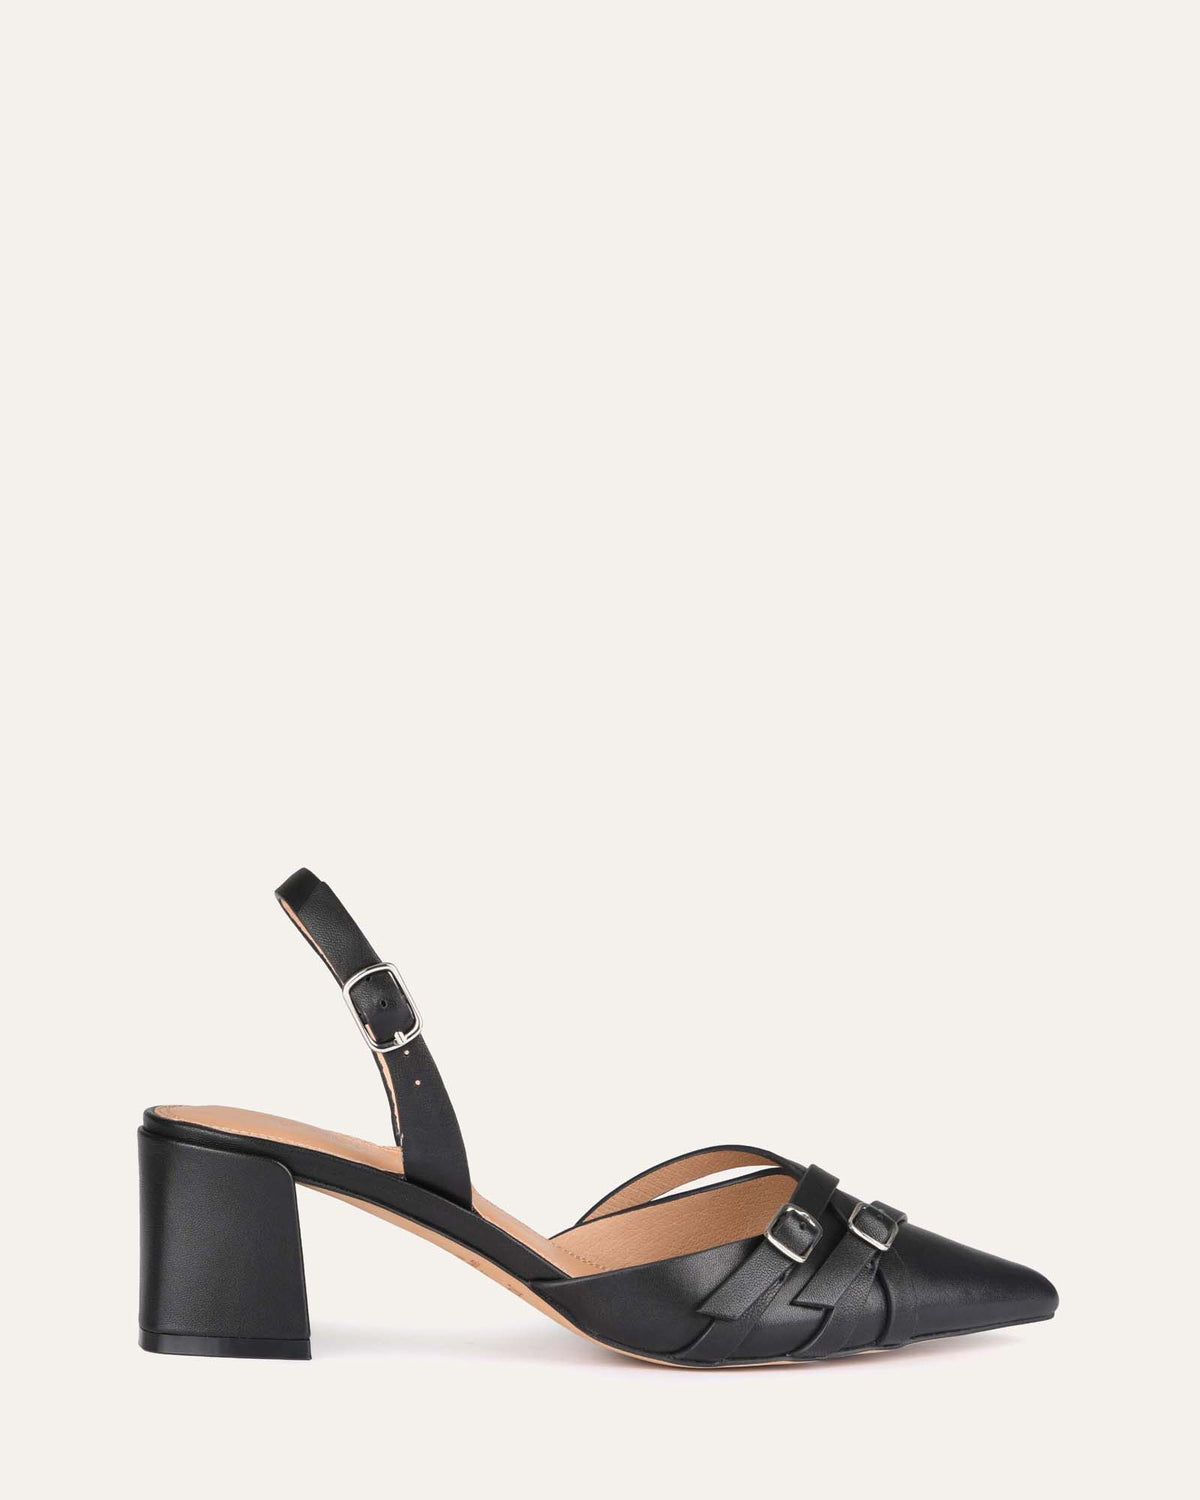 COBY LOW HEELS BLACK LEATHER